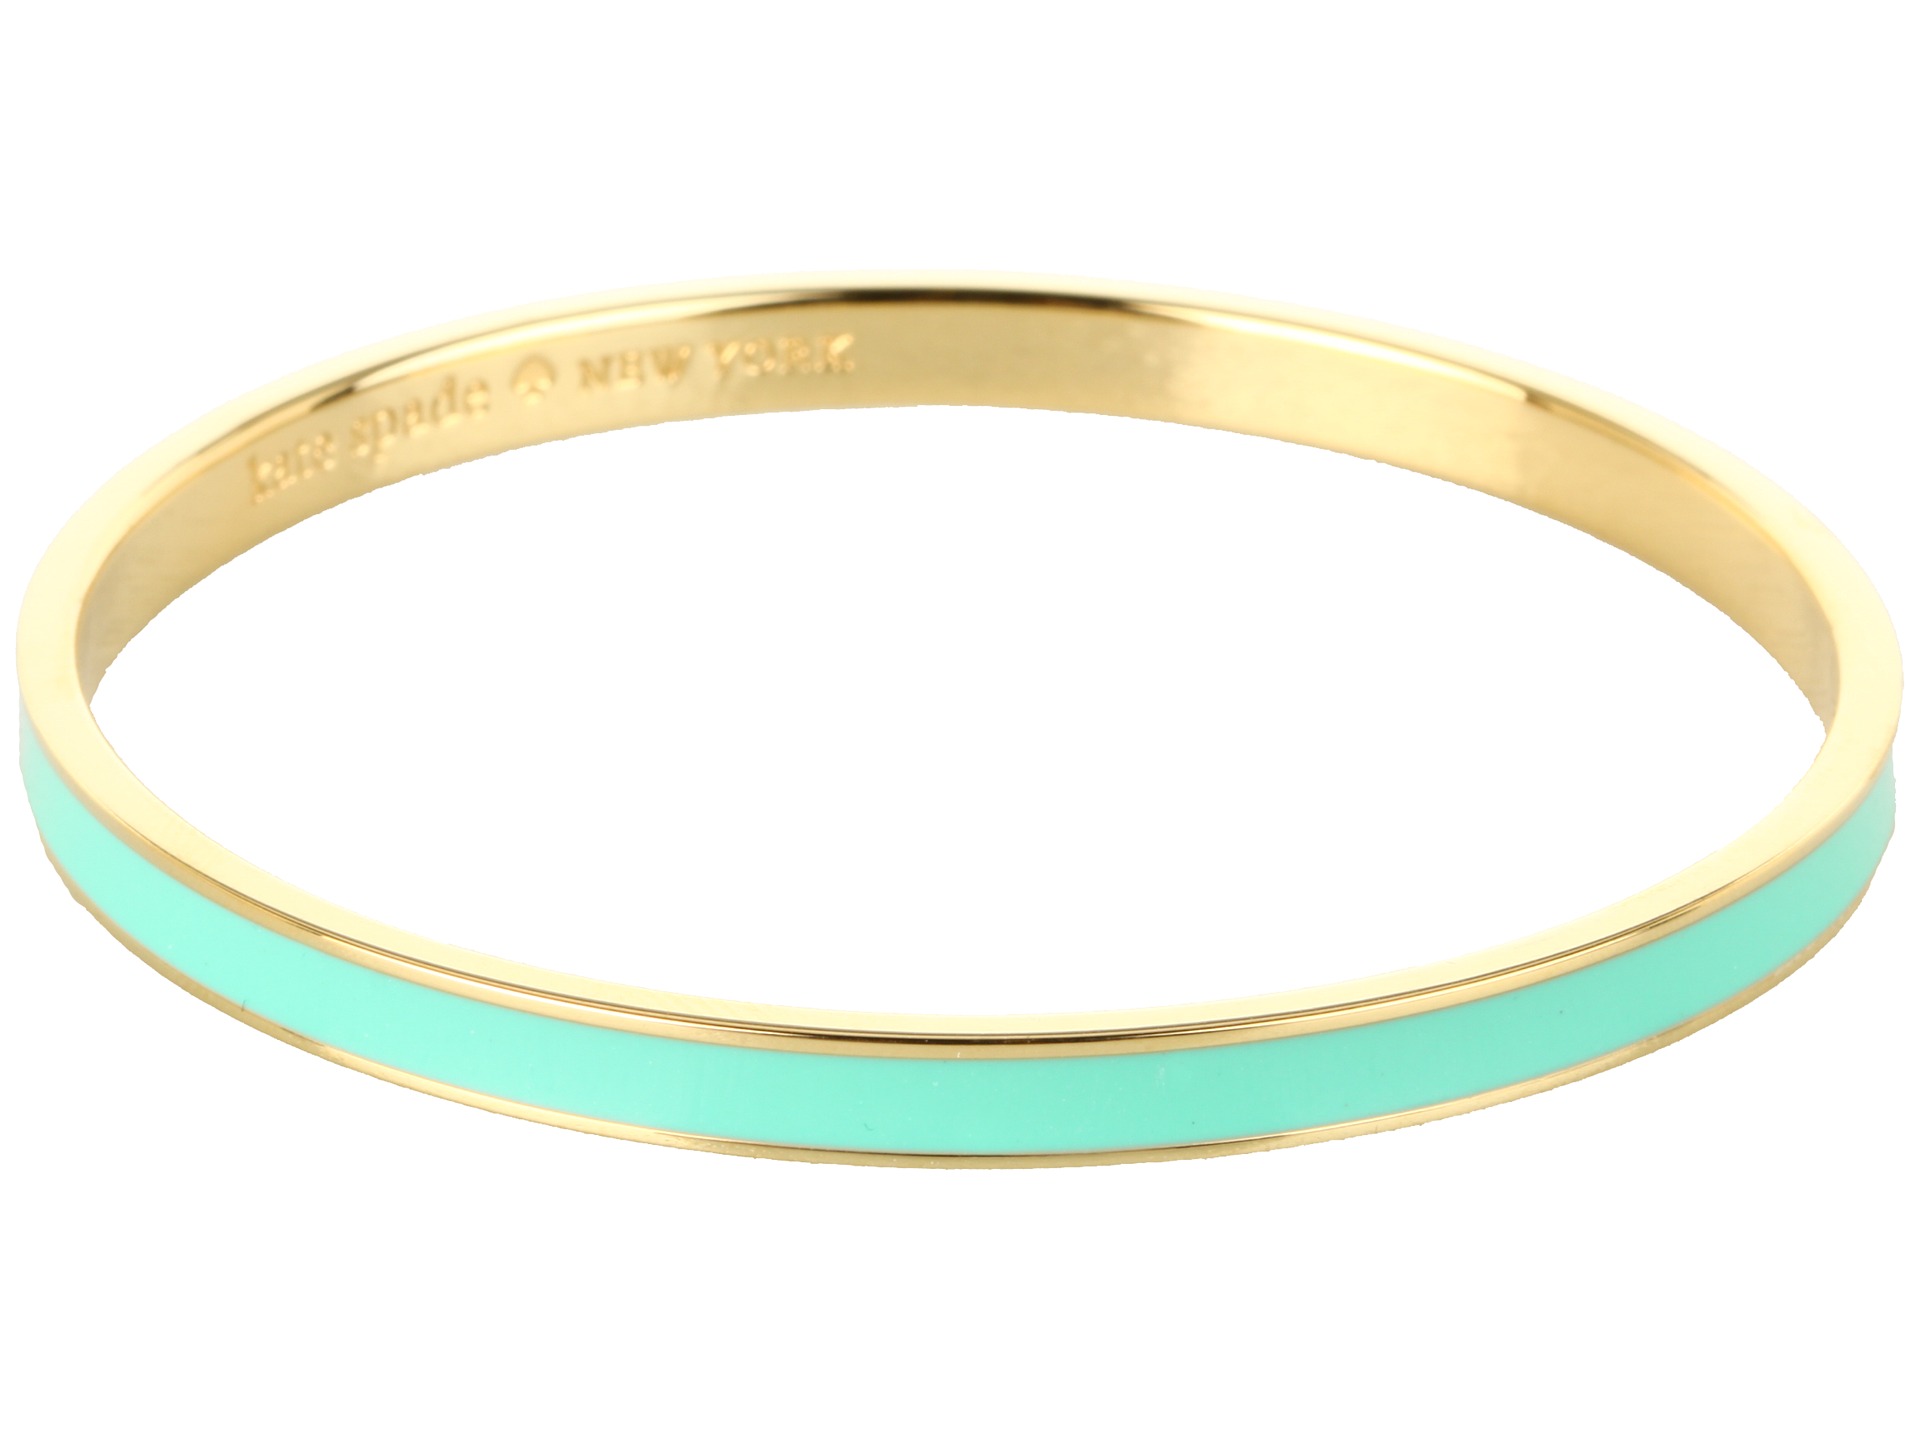 Kate Spade New York Sweeten the Deal Solid Idiom Bangles $32.00 NEW 